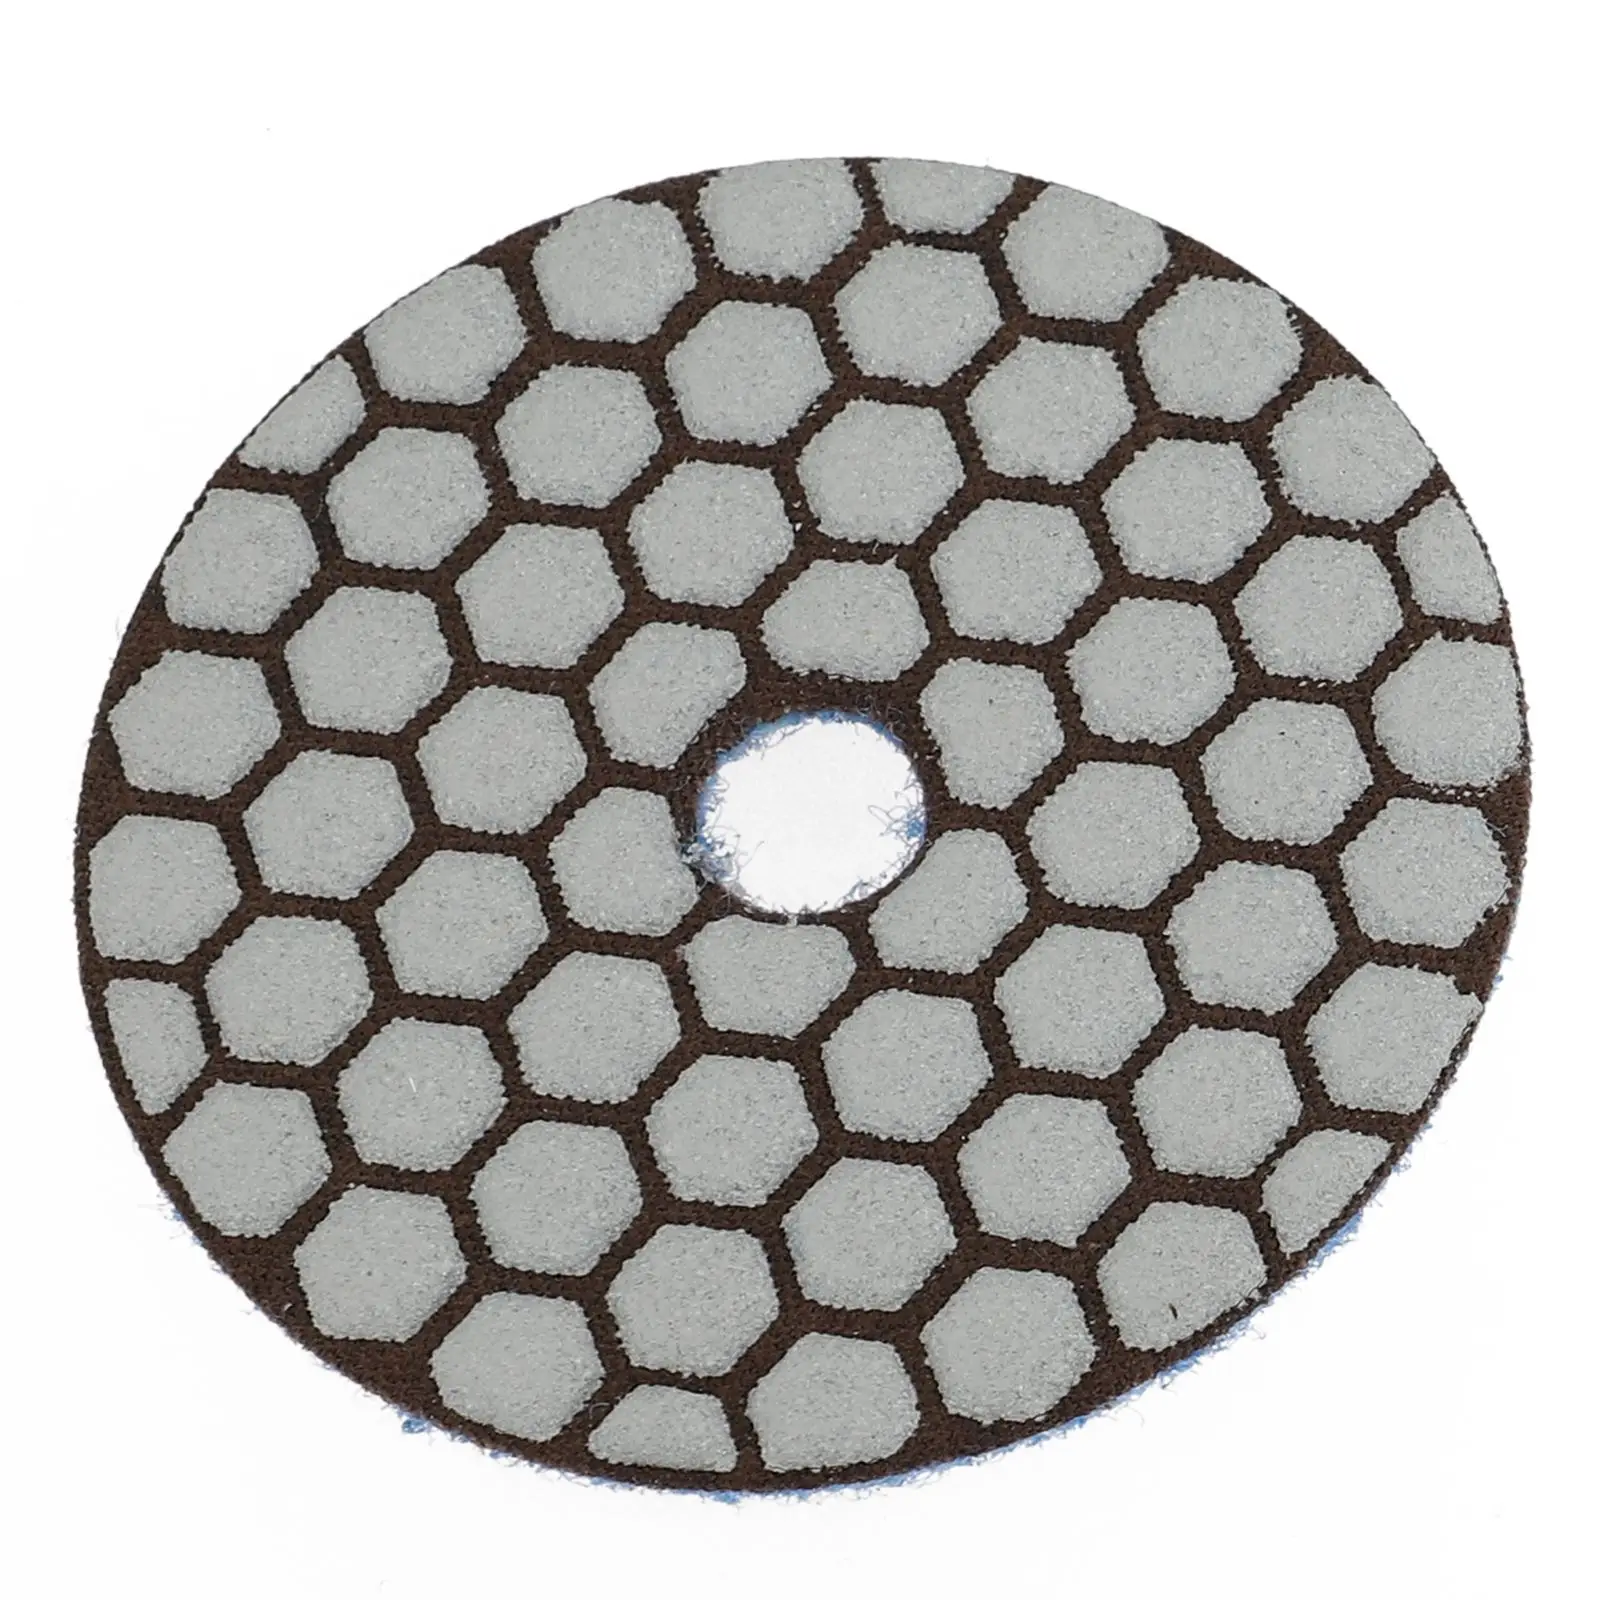 Durable Polishing Pad Polishing Tool 1pc 3Inch Diamond Dry For Granite Marble Grinding Polishing Pad Polishing With 13 3inch 4pin n010 0554 x266 01 cp436305 01 01a n010 0512 t502 touch screen with usb controller machines touch